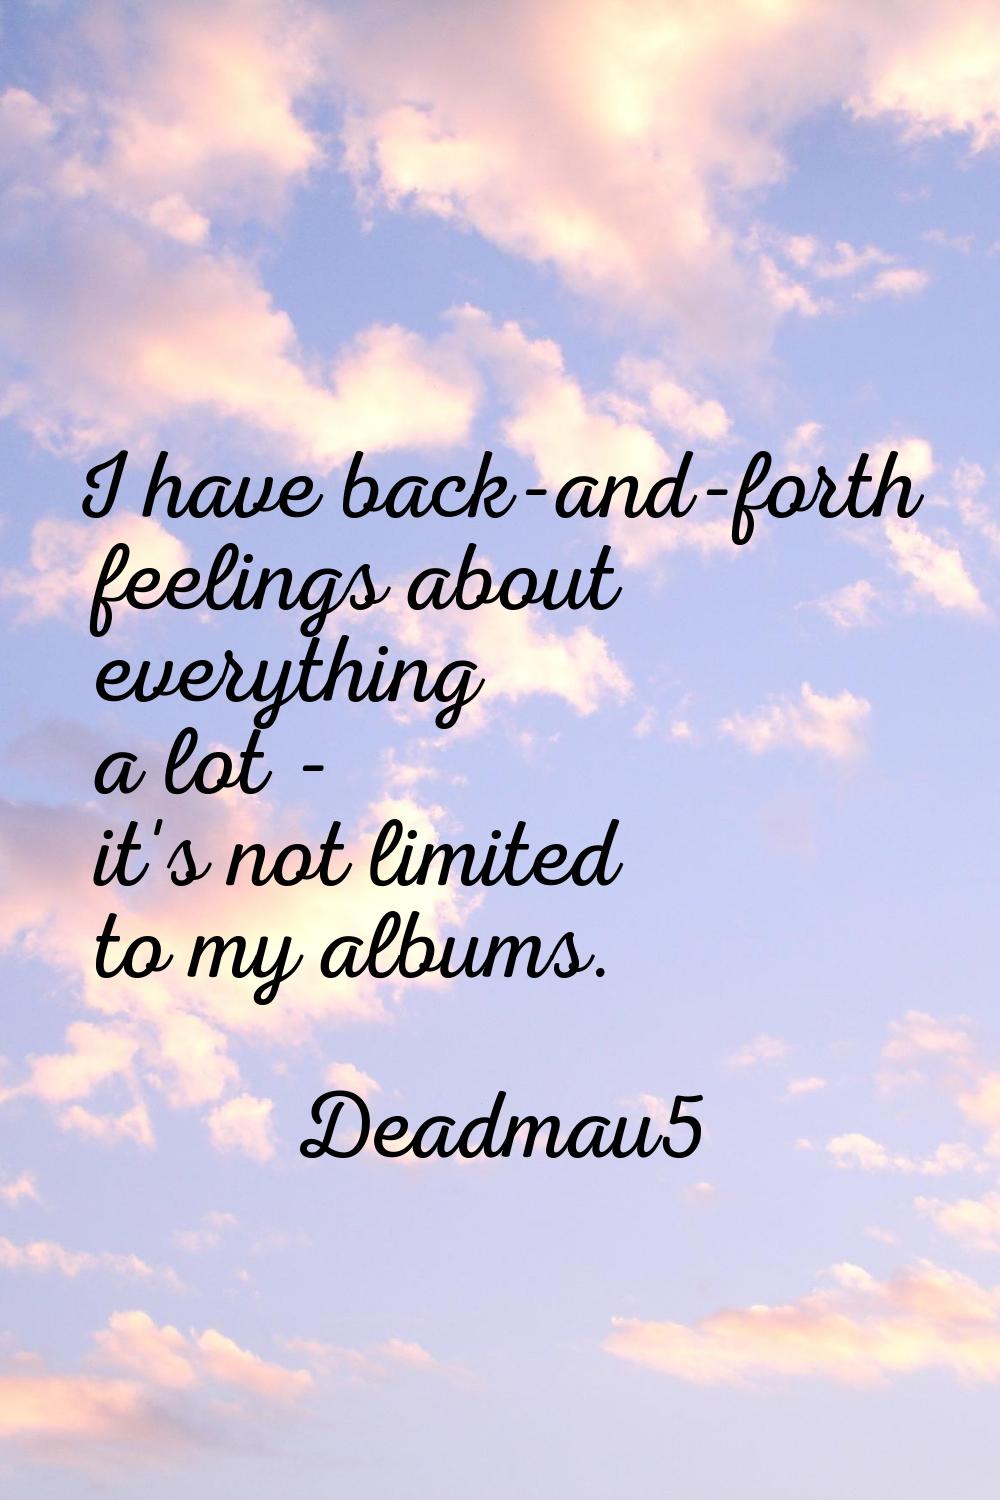 I have back-and-forth feelings about everything a lot - it's not limited to my albums.